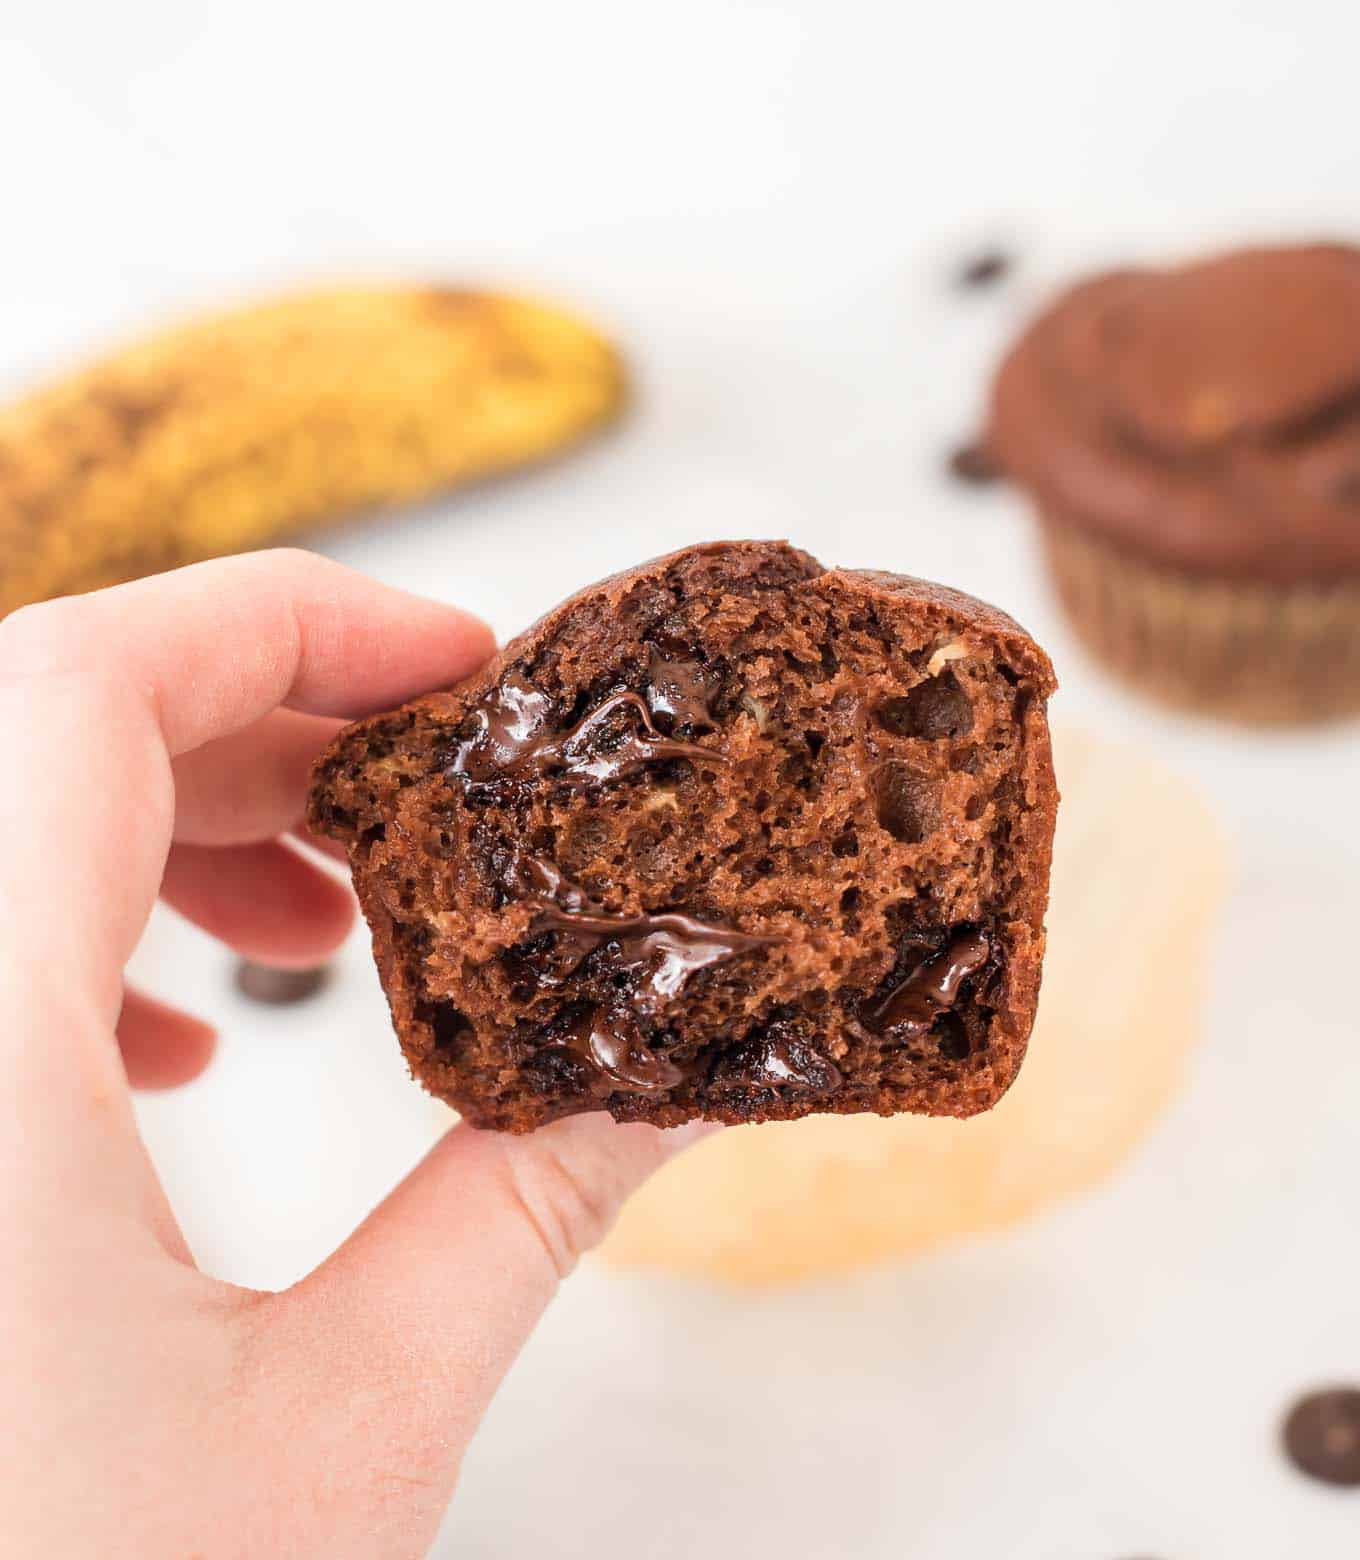 a hand holding half of a chocolate muffin to show the inside texture